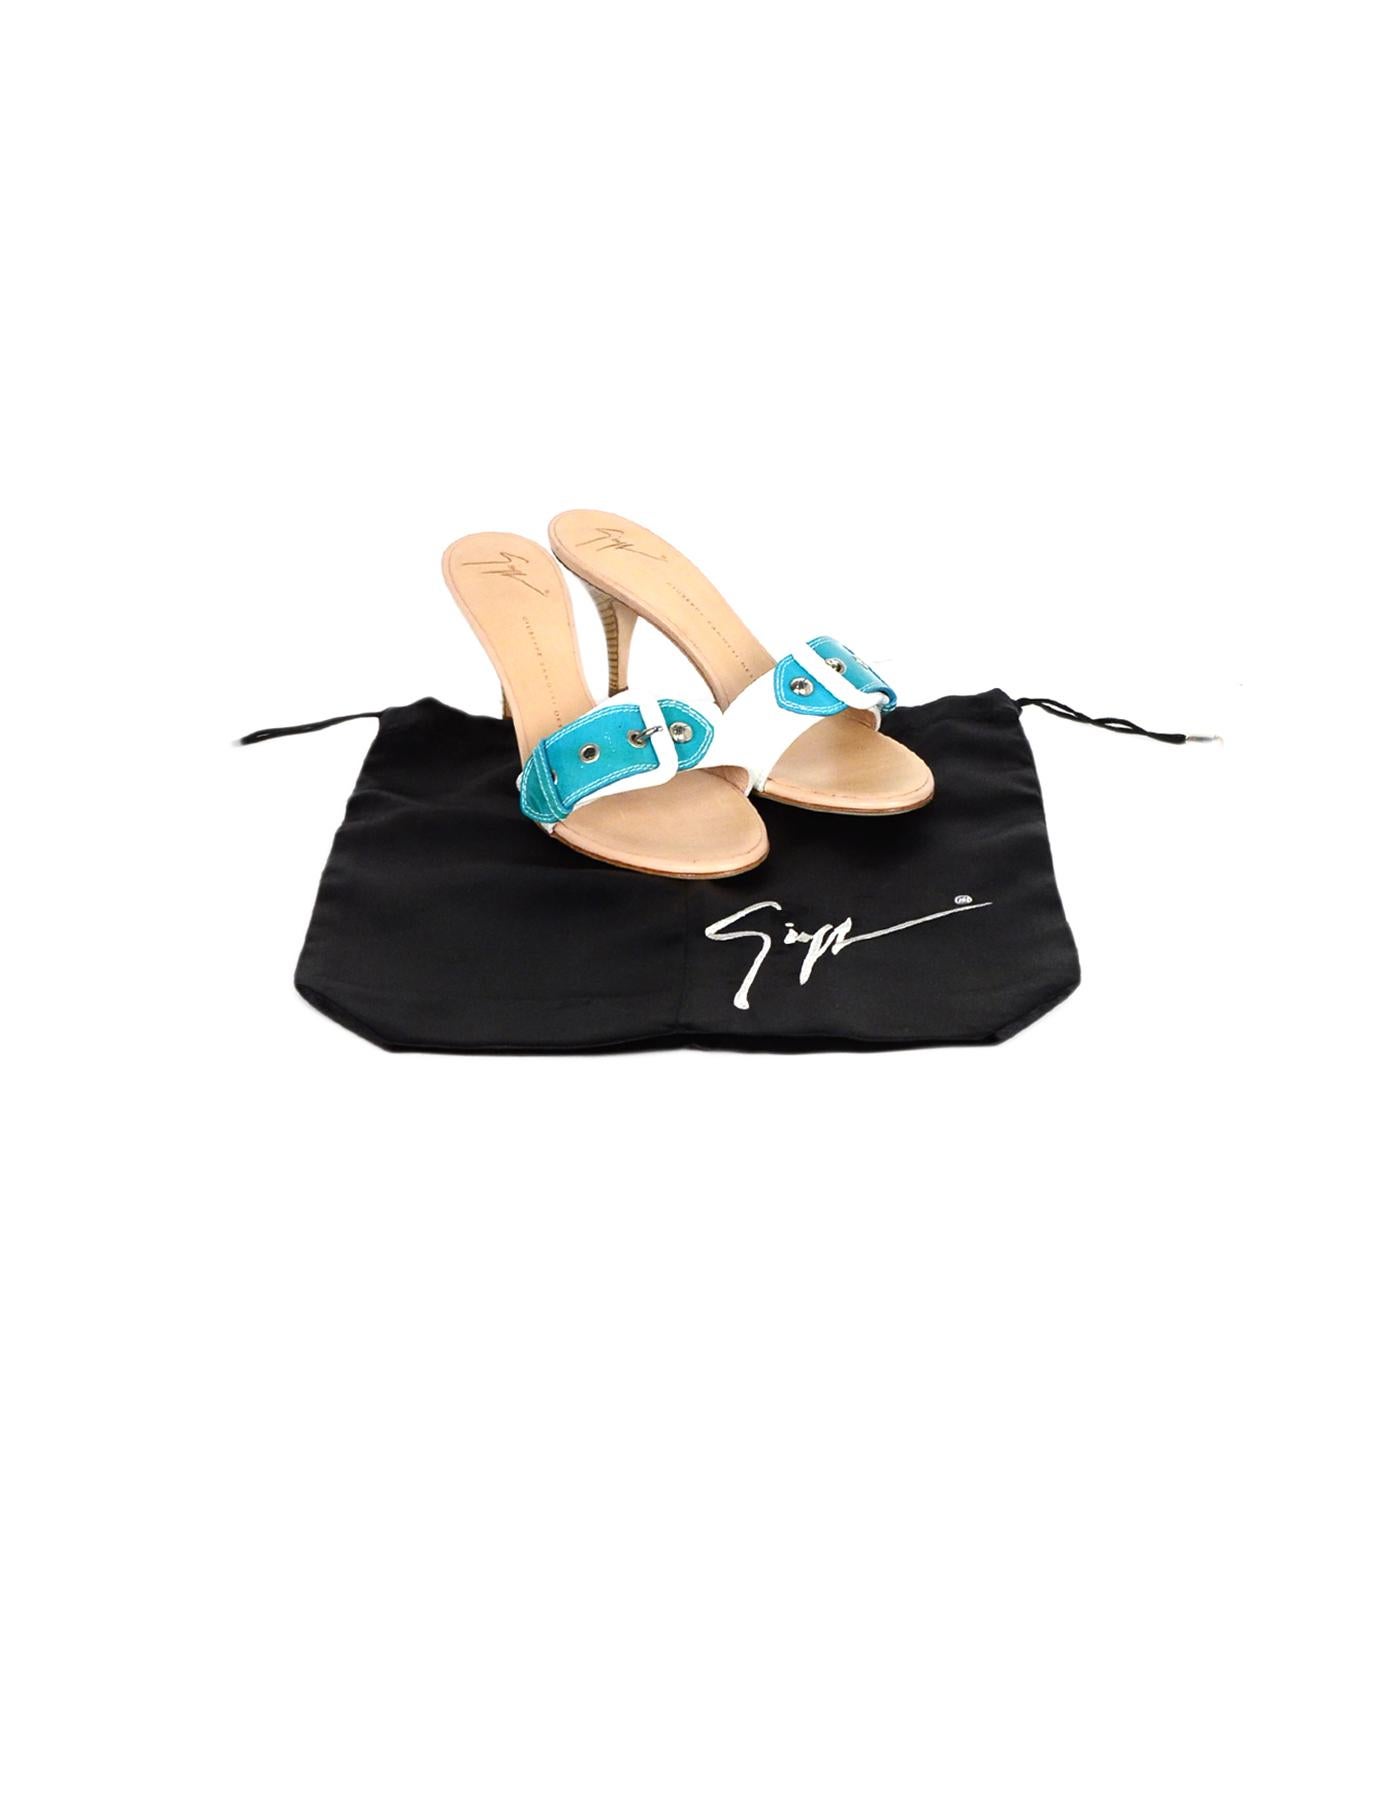 Giuseppe Zanotti White/Turquoise Patent Buckle Mules sz 39

Made In: Italy
Color: White, turquoise
Hardware: Silvertone hardware
Materials: Patent leather
Closure/Opening: Slide on
Overall Condition: Excellent pre-owned condition, with minor wear to